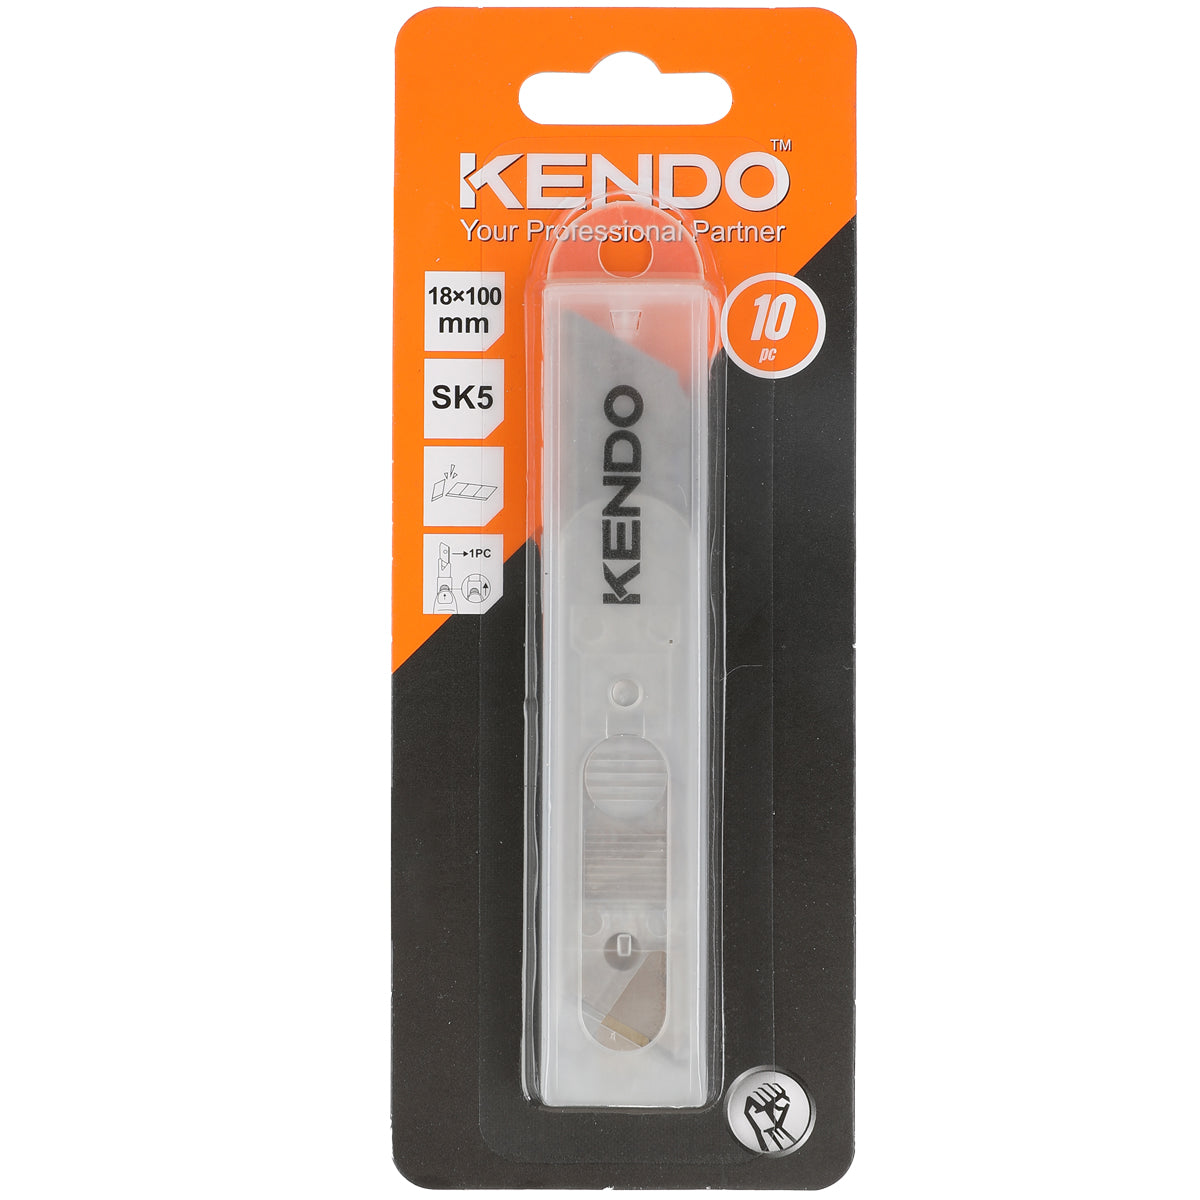 Kendo 18mm Snap-off Knife Blades 10 piece